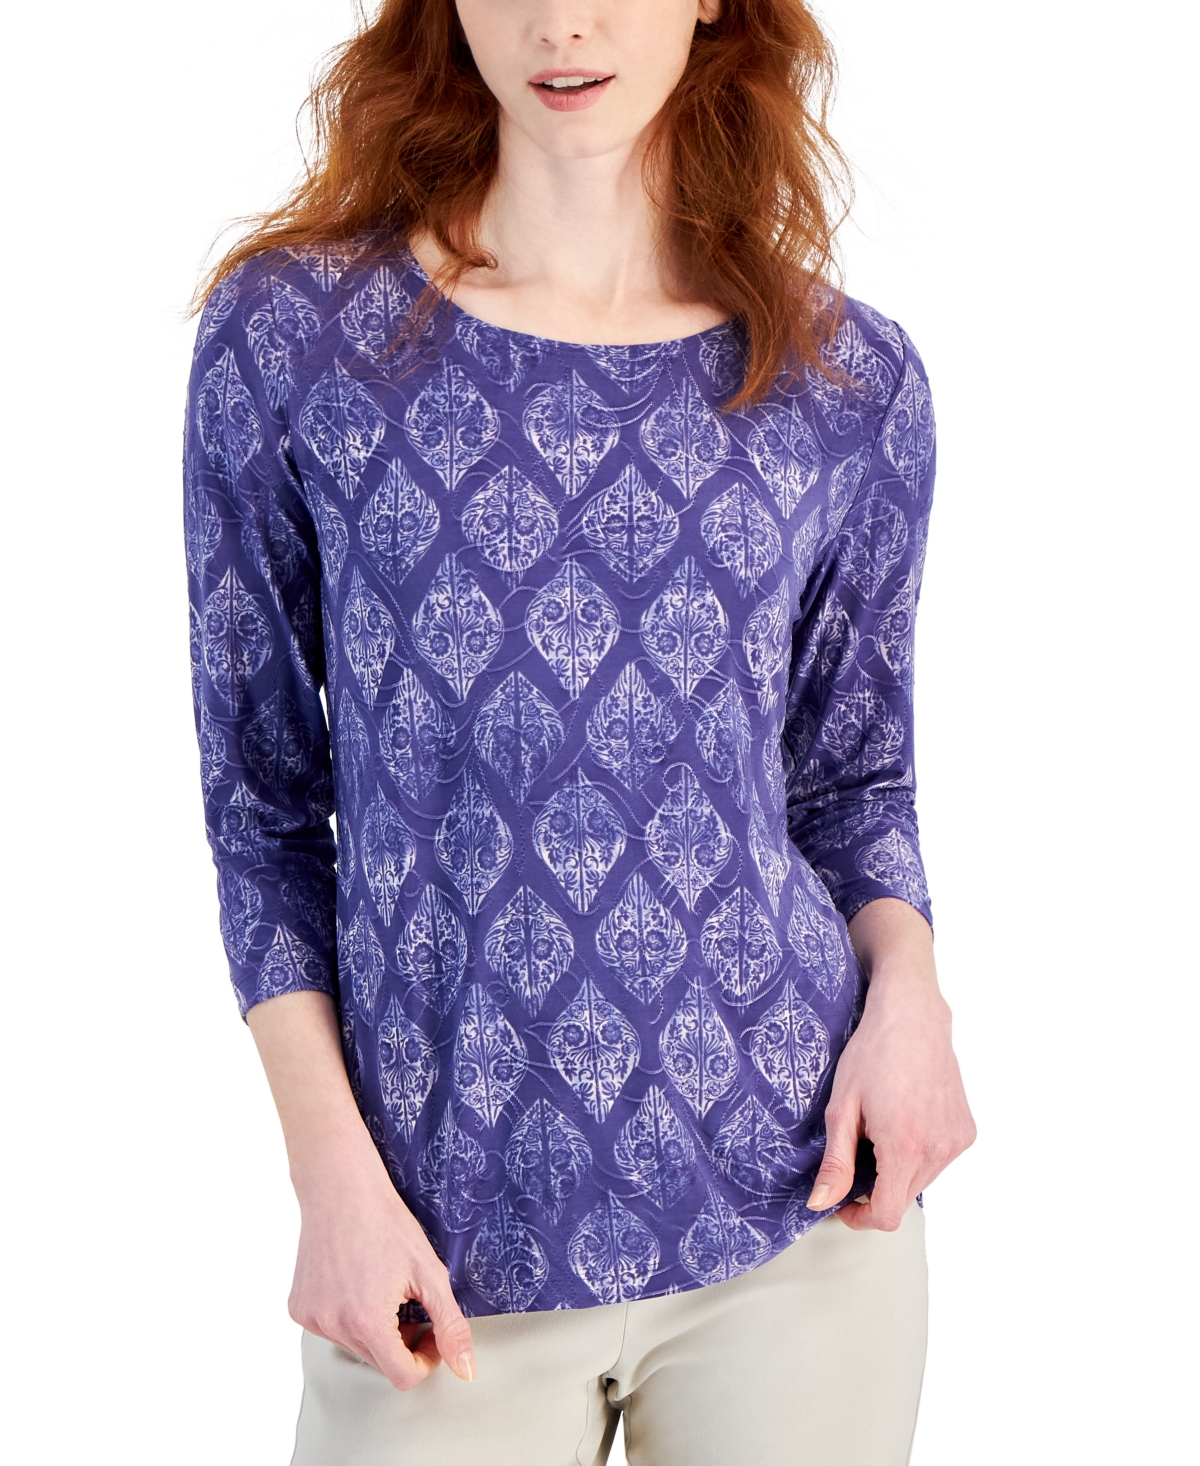 Women's Jacquard-Print Knit Top, Created for Macy's - Bright Pink Combo